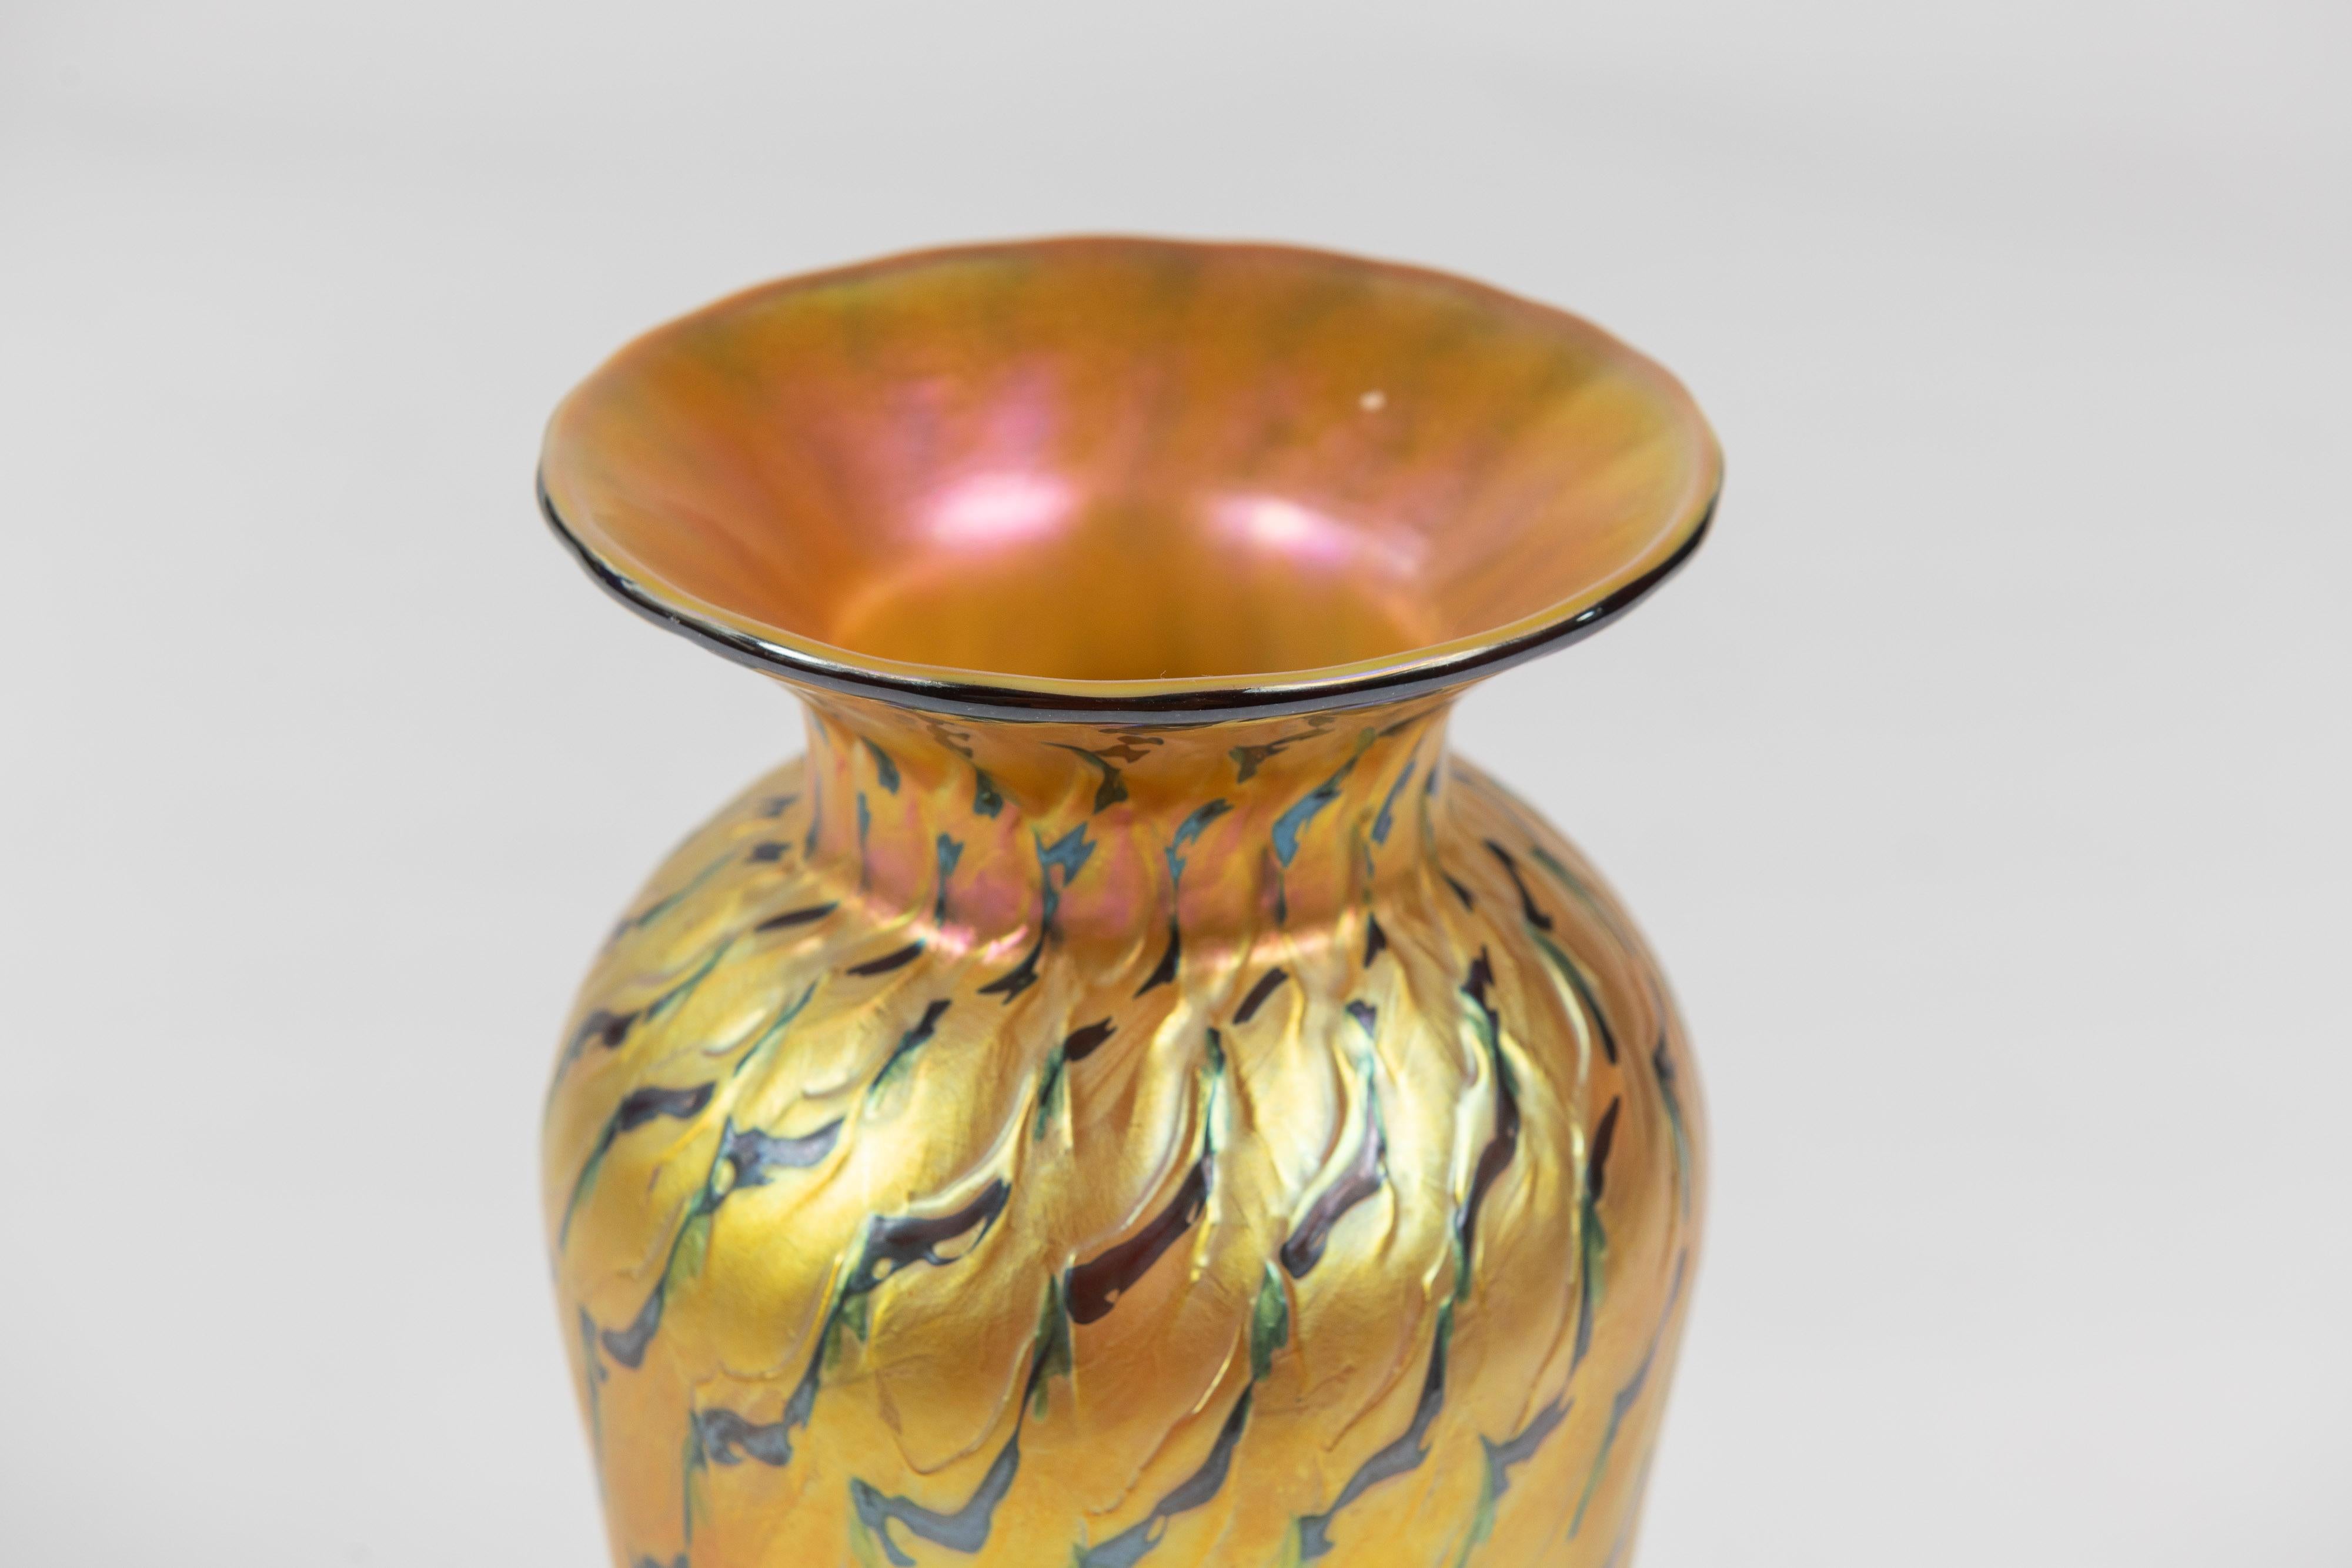 American Gold and Green Iridescent Art Glass Vase, Lundberg Studios of California, Signed For Sale